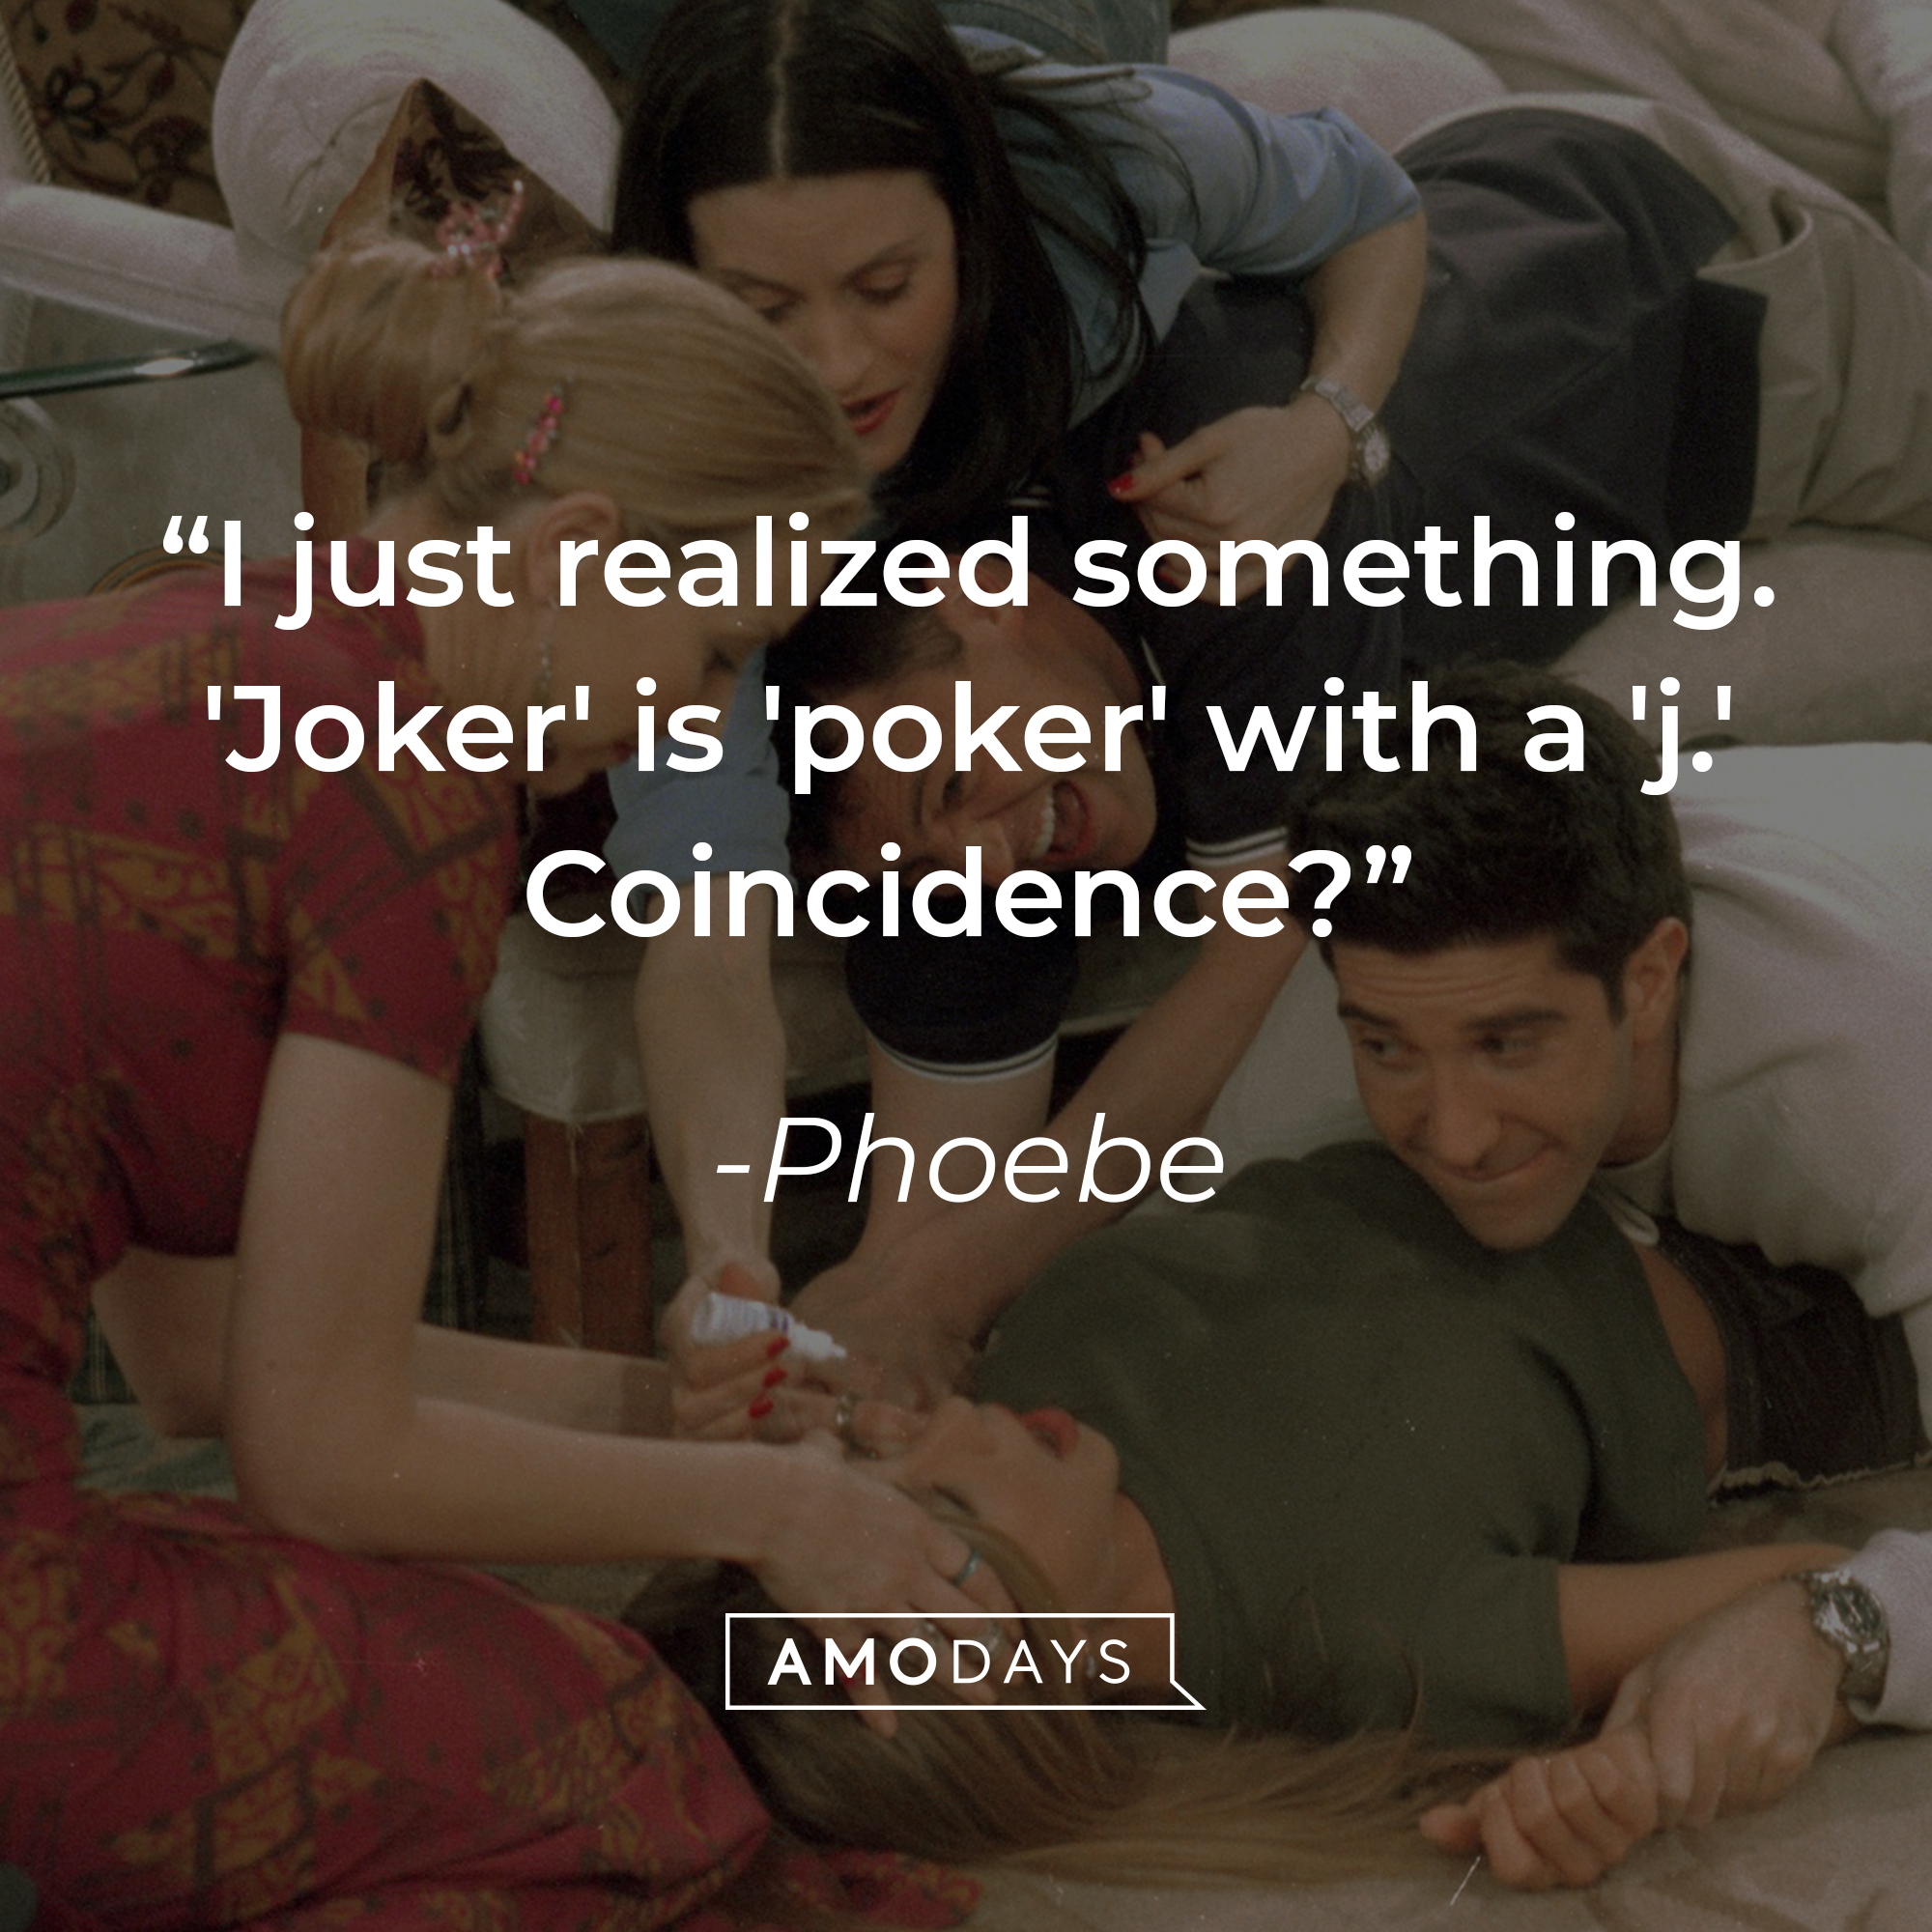 Phoebe's quote: "I just realized something. 'Joker' is 'poker' with a 'j.' Coincidence?" | Source: Facebook.com/friends.tv